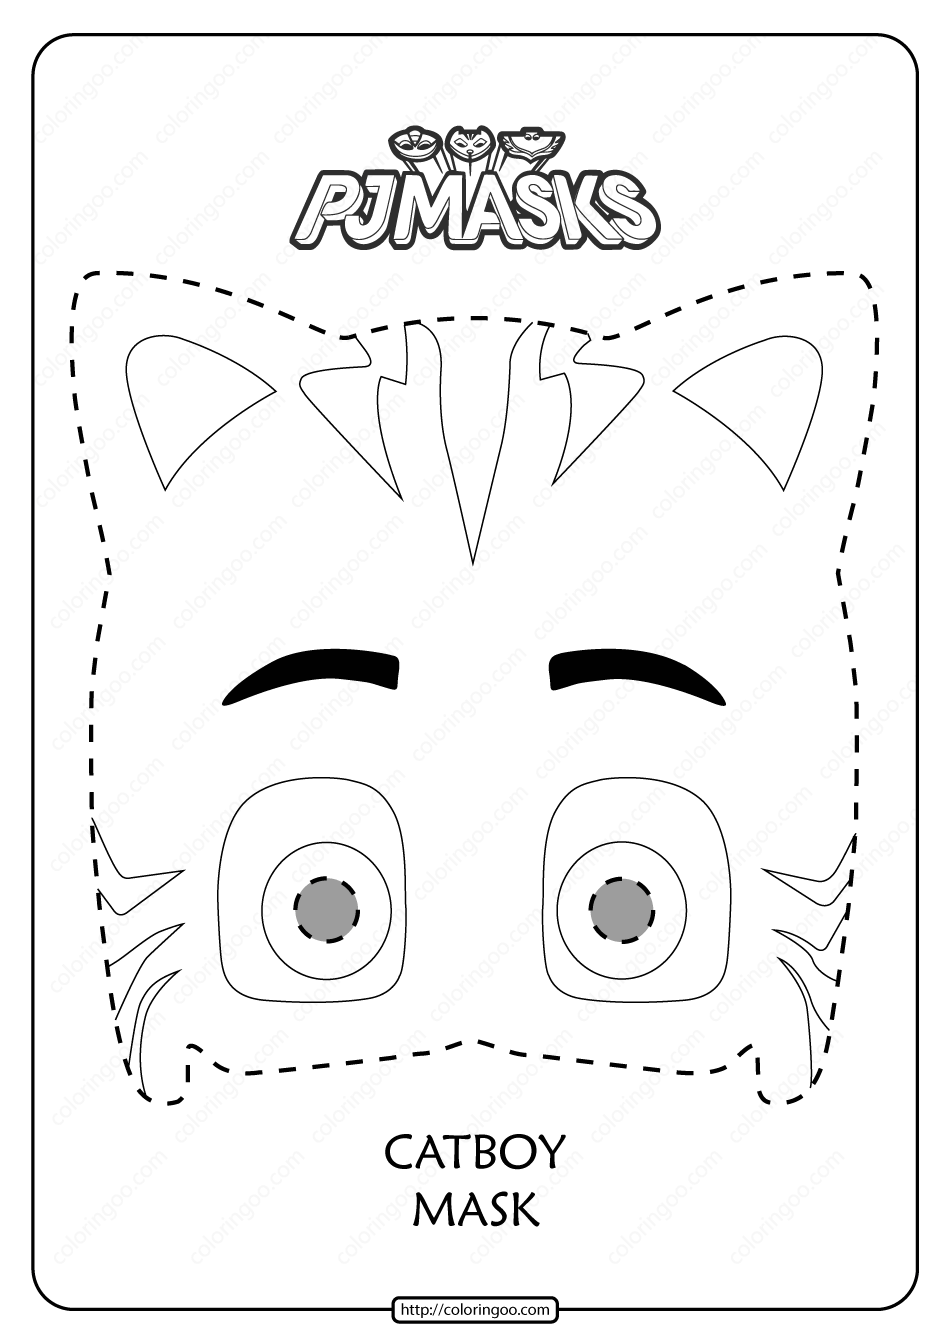 Free Printable Catboy PJ Masks Coloring Page - Coloring Home